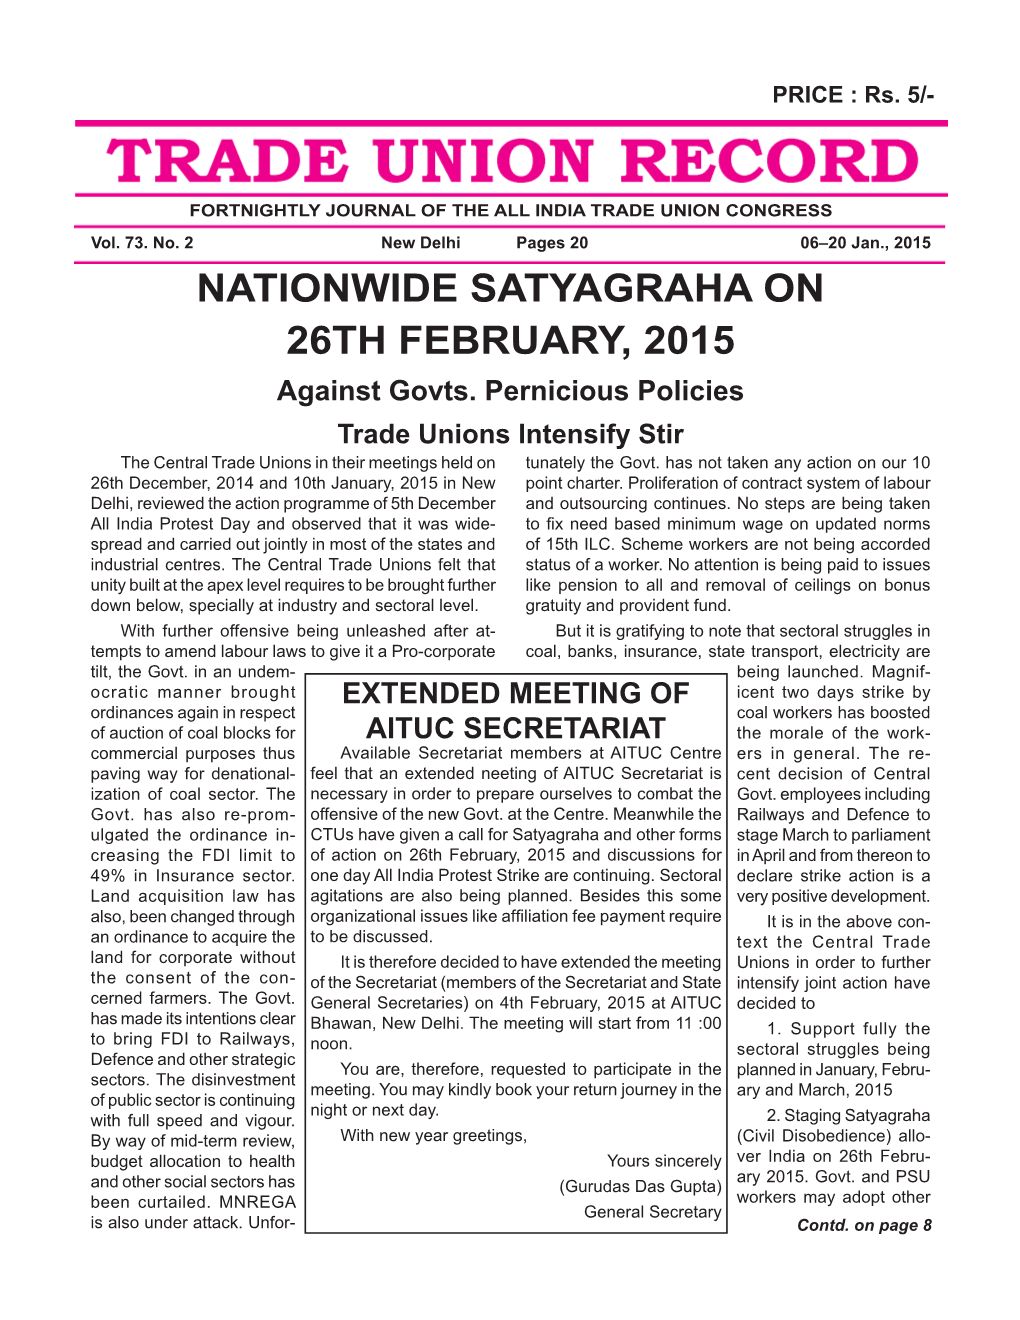 NATIONWIDE SATYAGRAHA on 26TH FEBRUARY, 2015 Against Govts. Pernicious Policies Trade Unions Intensify Stir